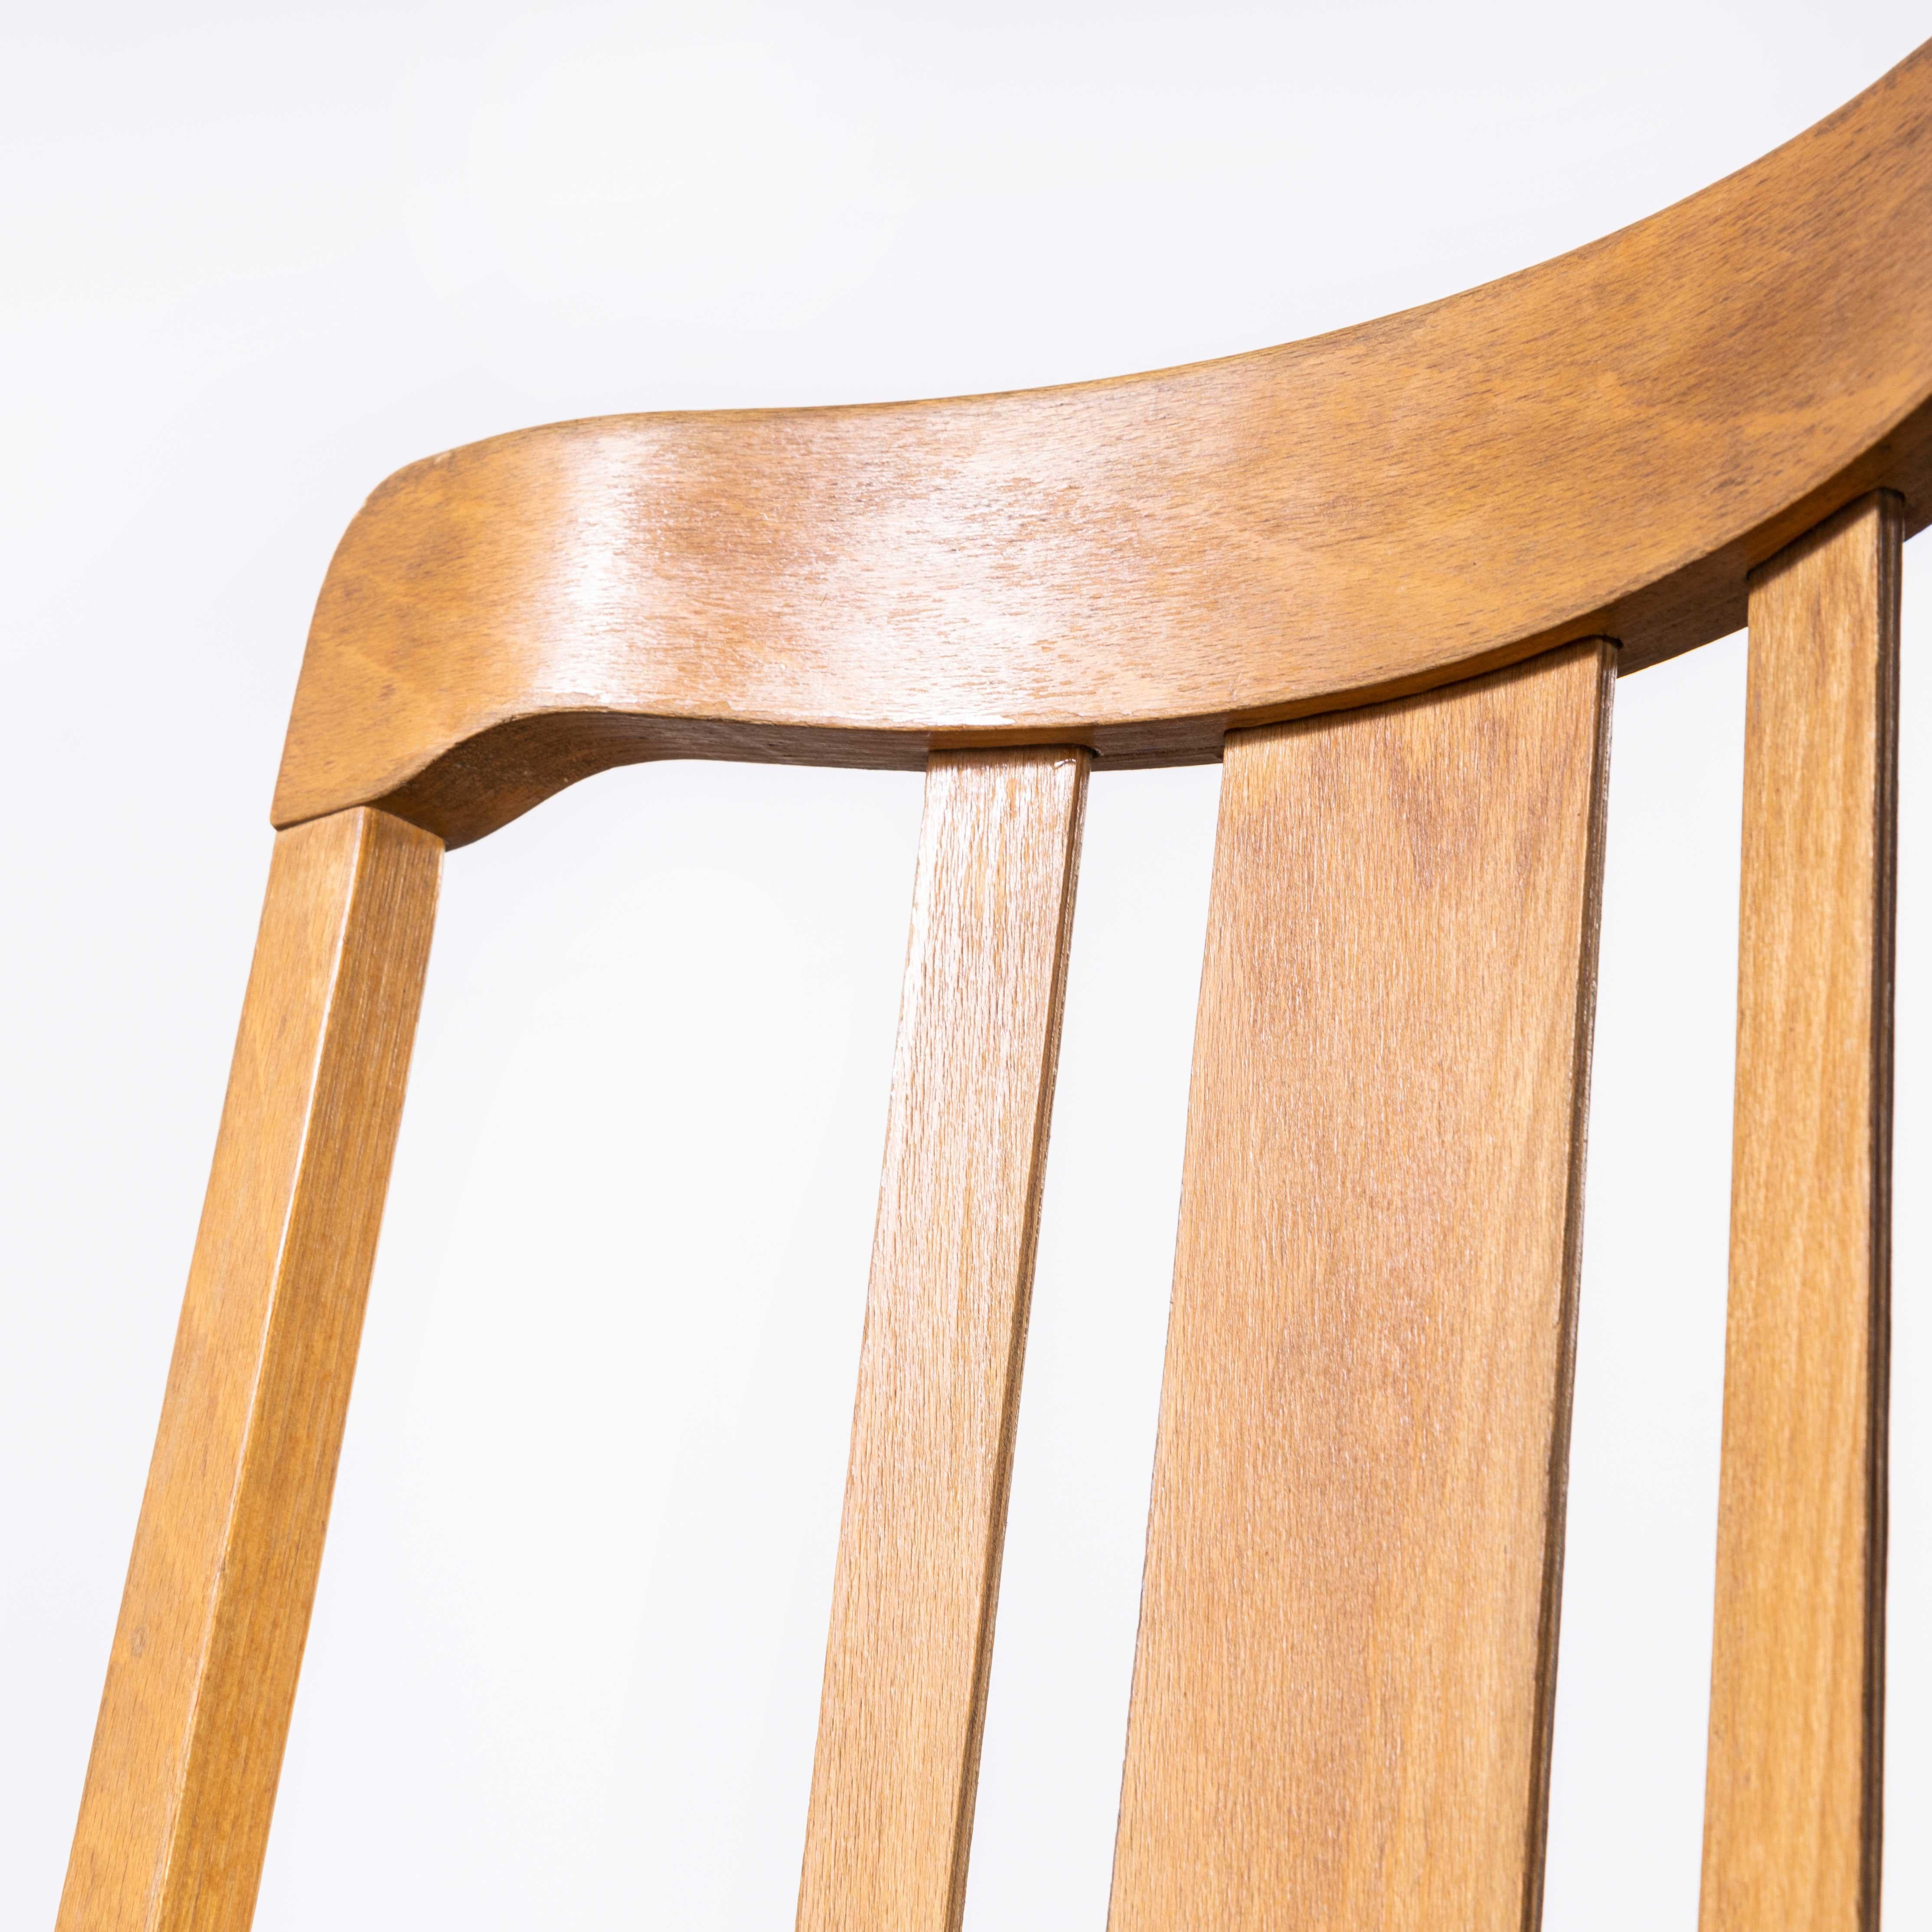 1960’s Czech bentwood chapel chairs – set of six
1960’s Czech bentwood chapel chairs – set of six. Elegant yet slightly brutal Chapel chairs from the Czech Republic. Made in steam bent and laminated beech they have a generous wide seat and very